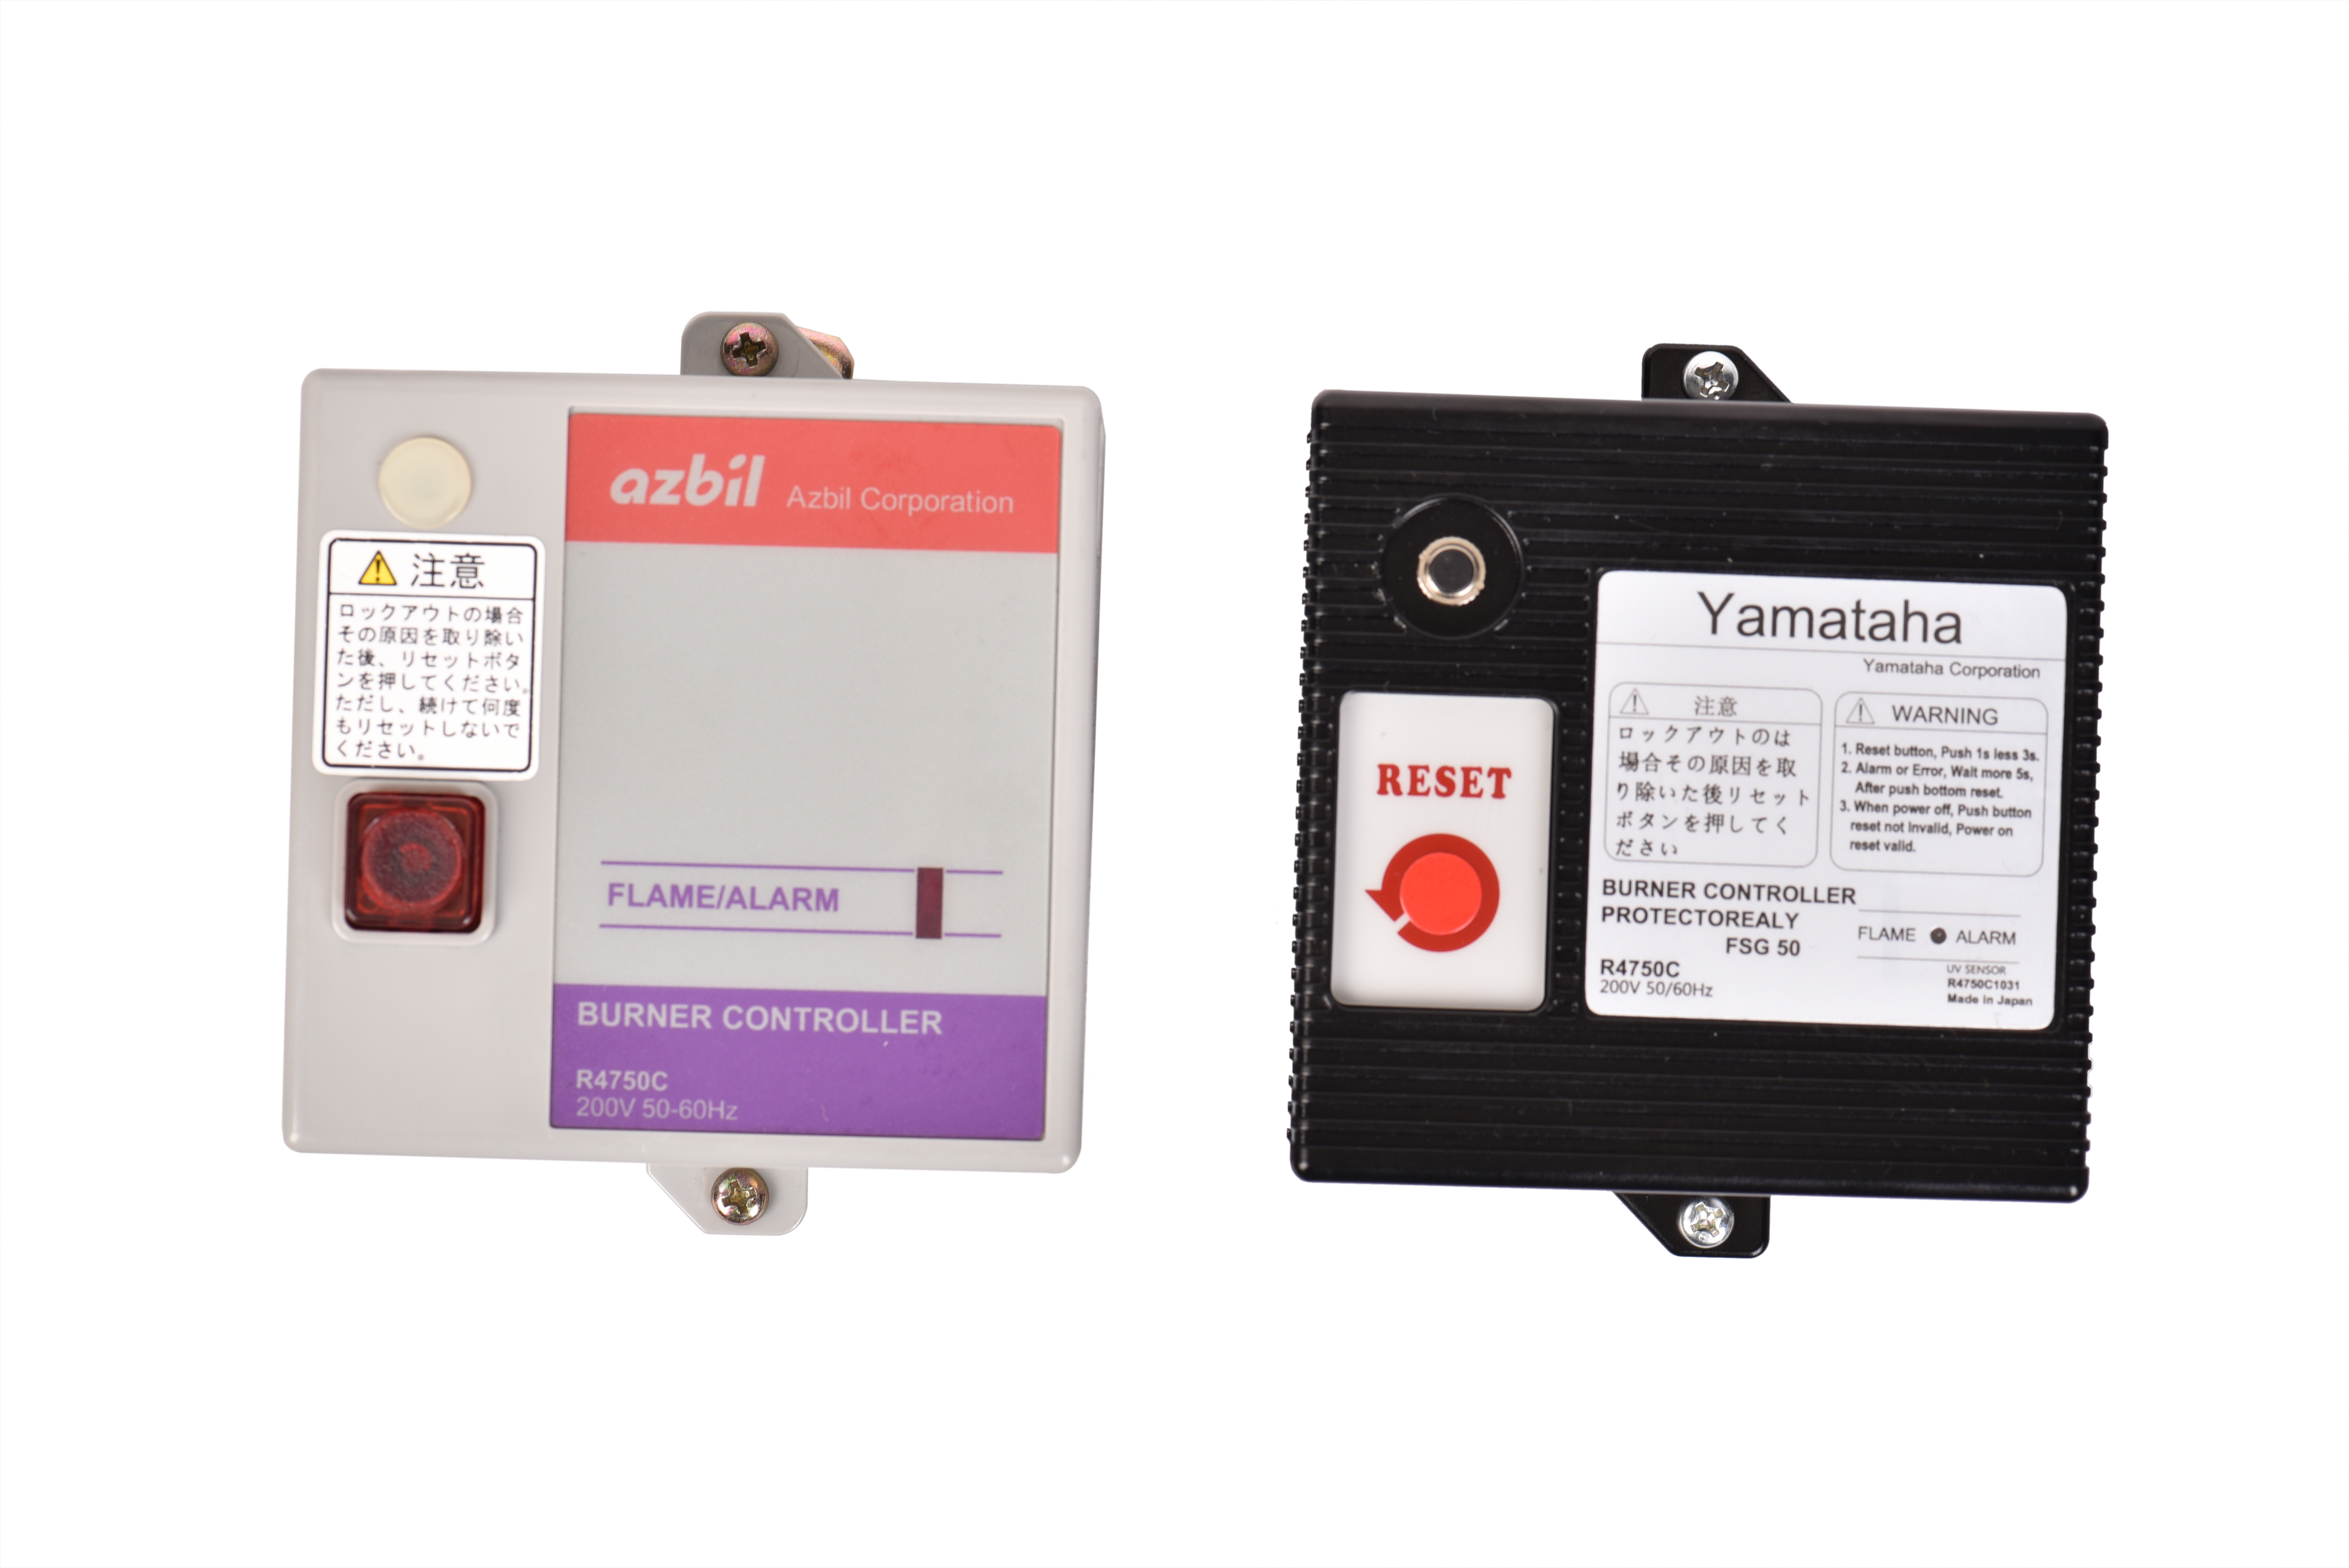 azbil R4750C(discontinued) is replaced with the Yamataha R4750C (1)